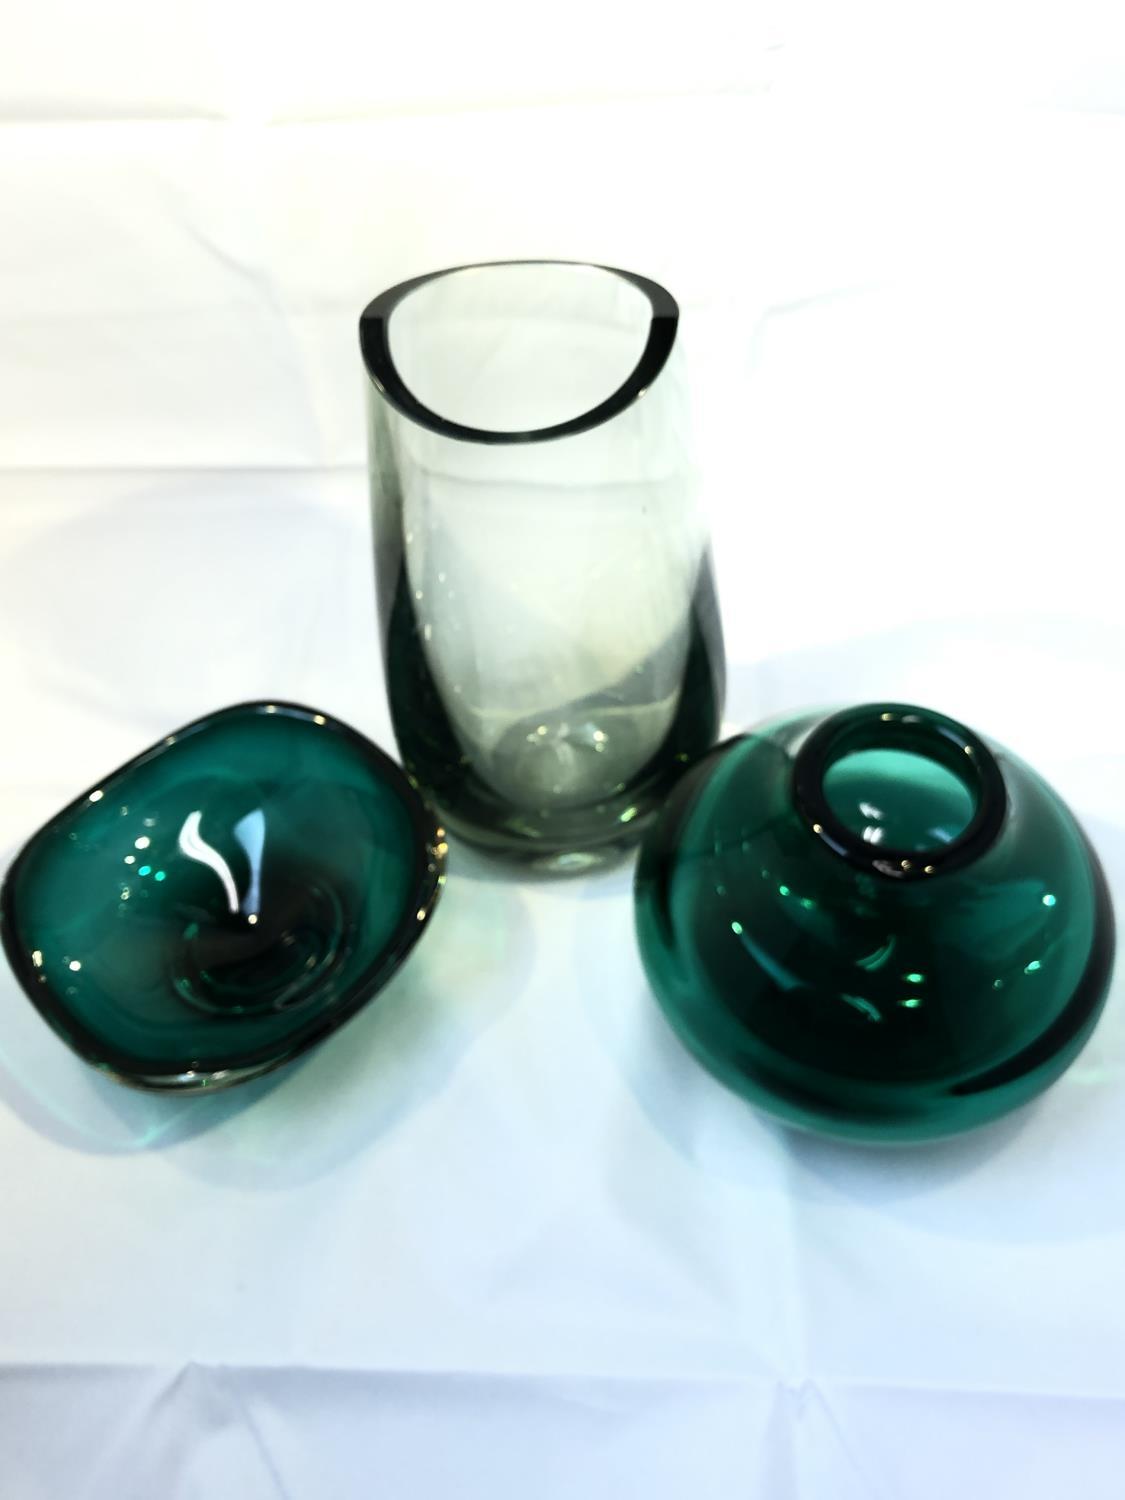 Geoffrey Baxter for Whitefriars - a 9493 arctic green glass vase with cut and polished neck, 24cm